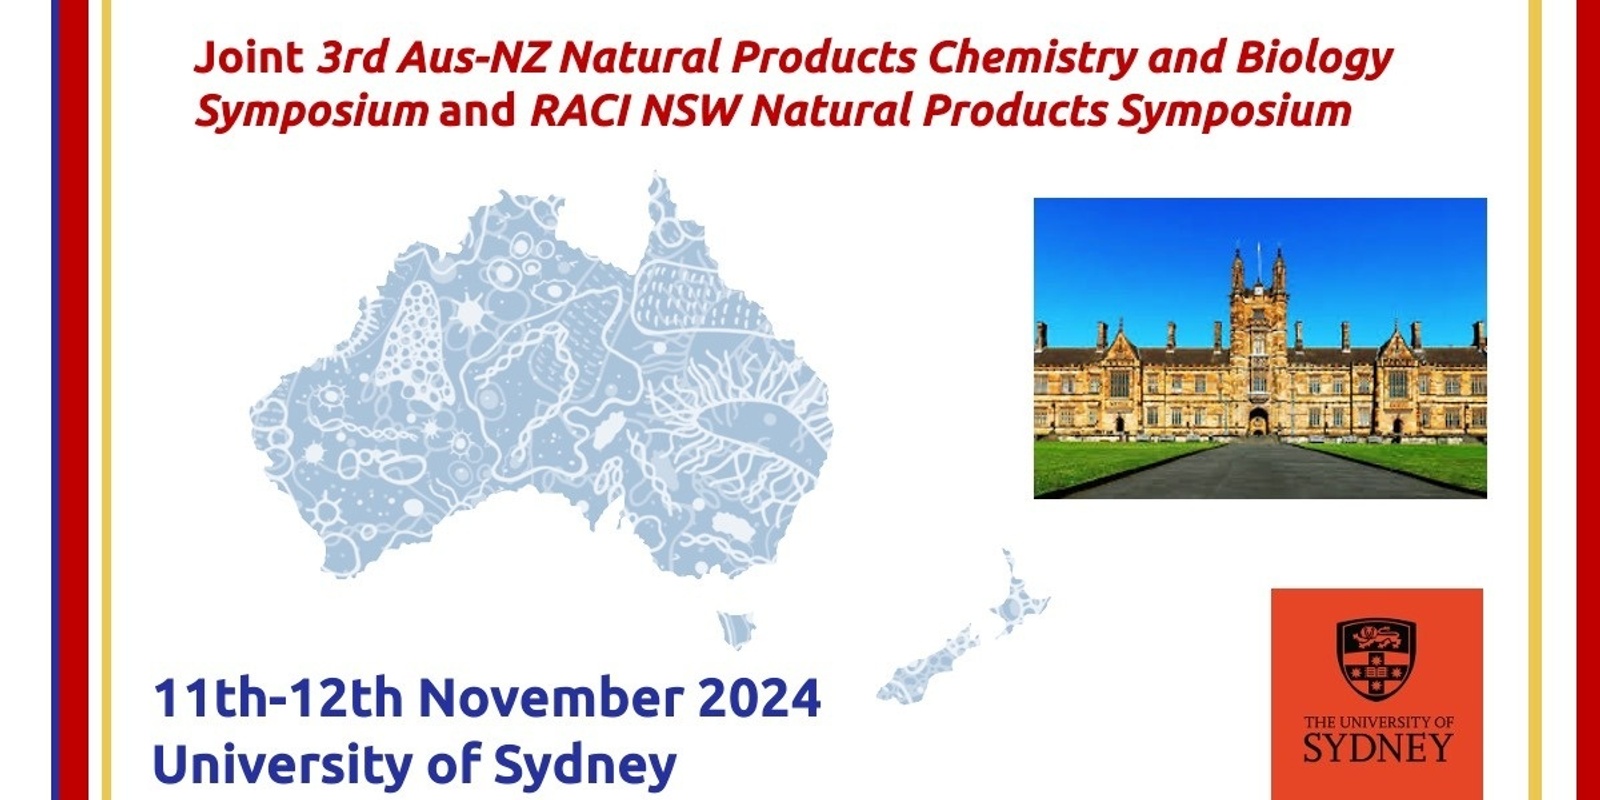 Banner image for 3rd Aus-NZ Natural Products Chemistry and Biology Symposium Joint with the RACI NSW Natural Products Symposium